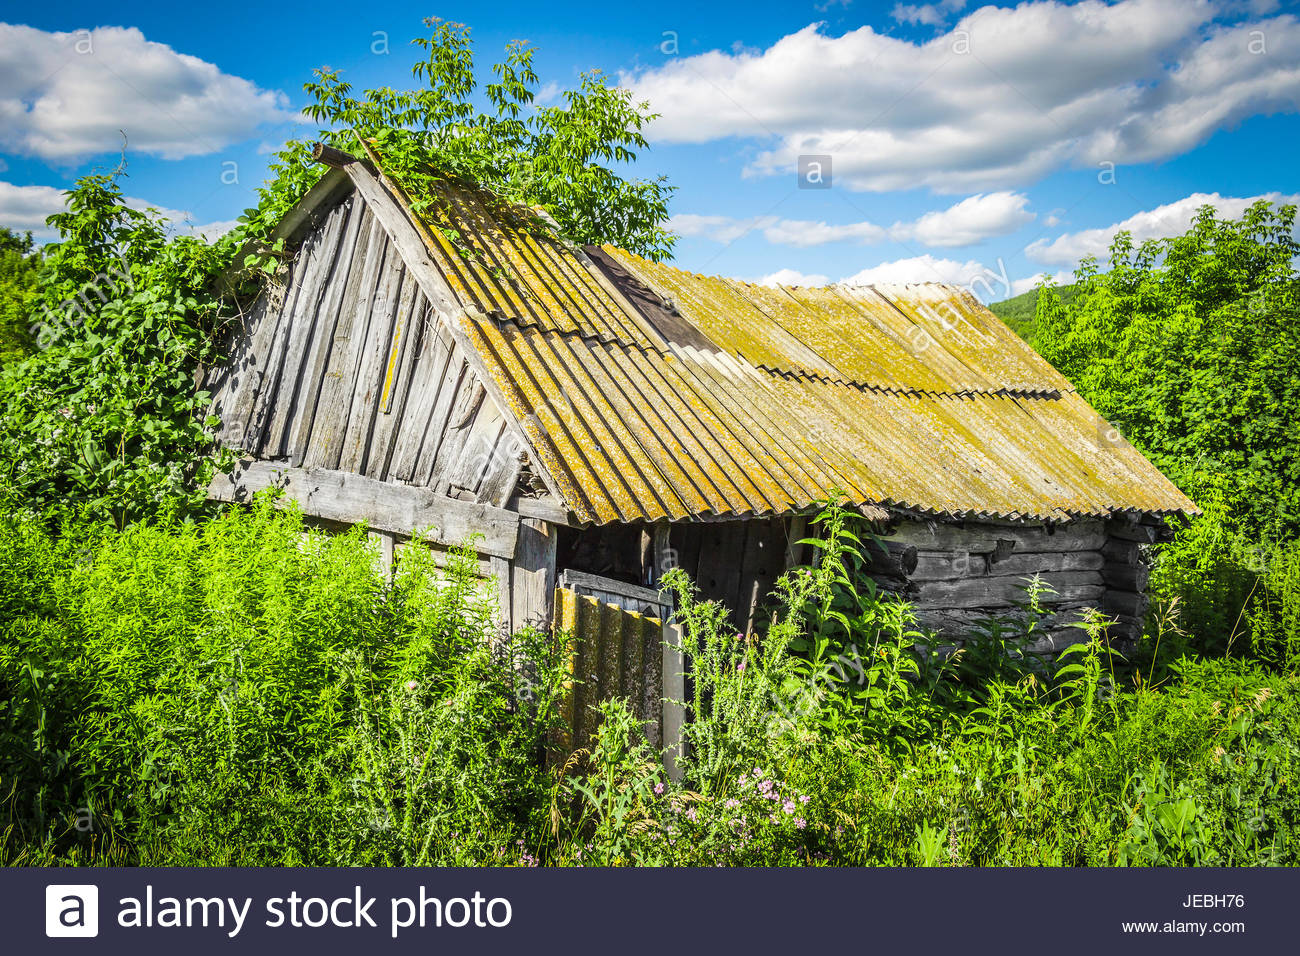 old-abandoned-wooden-hut-overgrown-grass-on-a-bright-sunny-summer-JEBH76.jpg